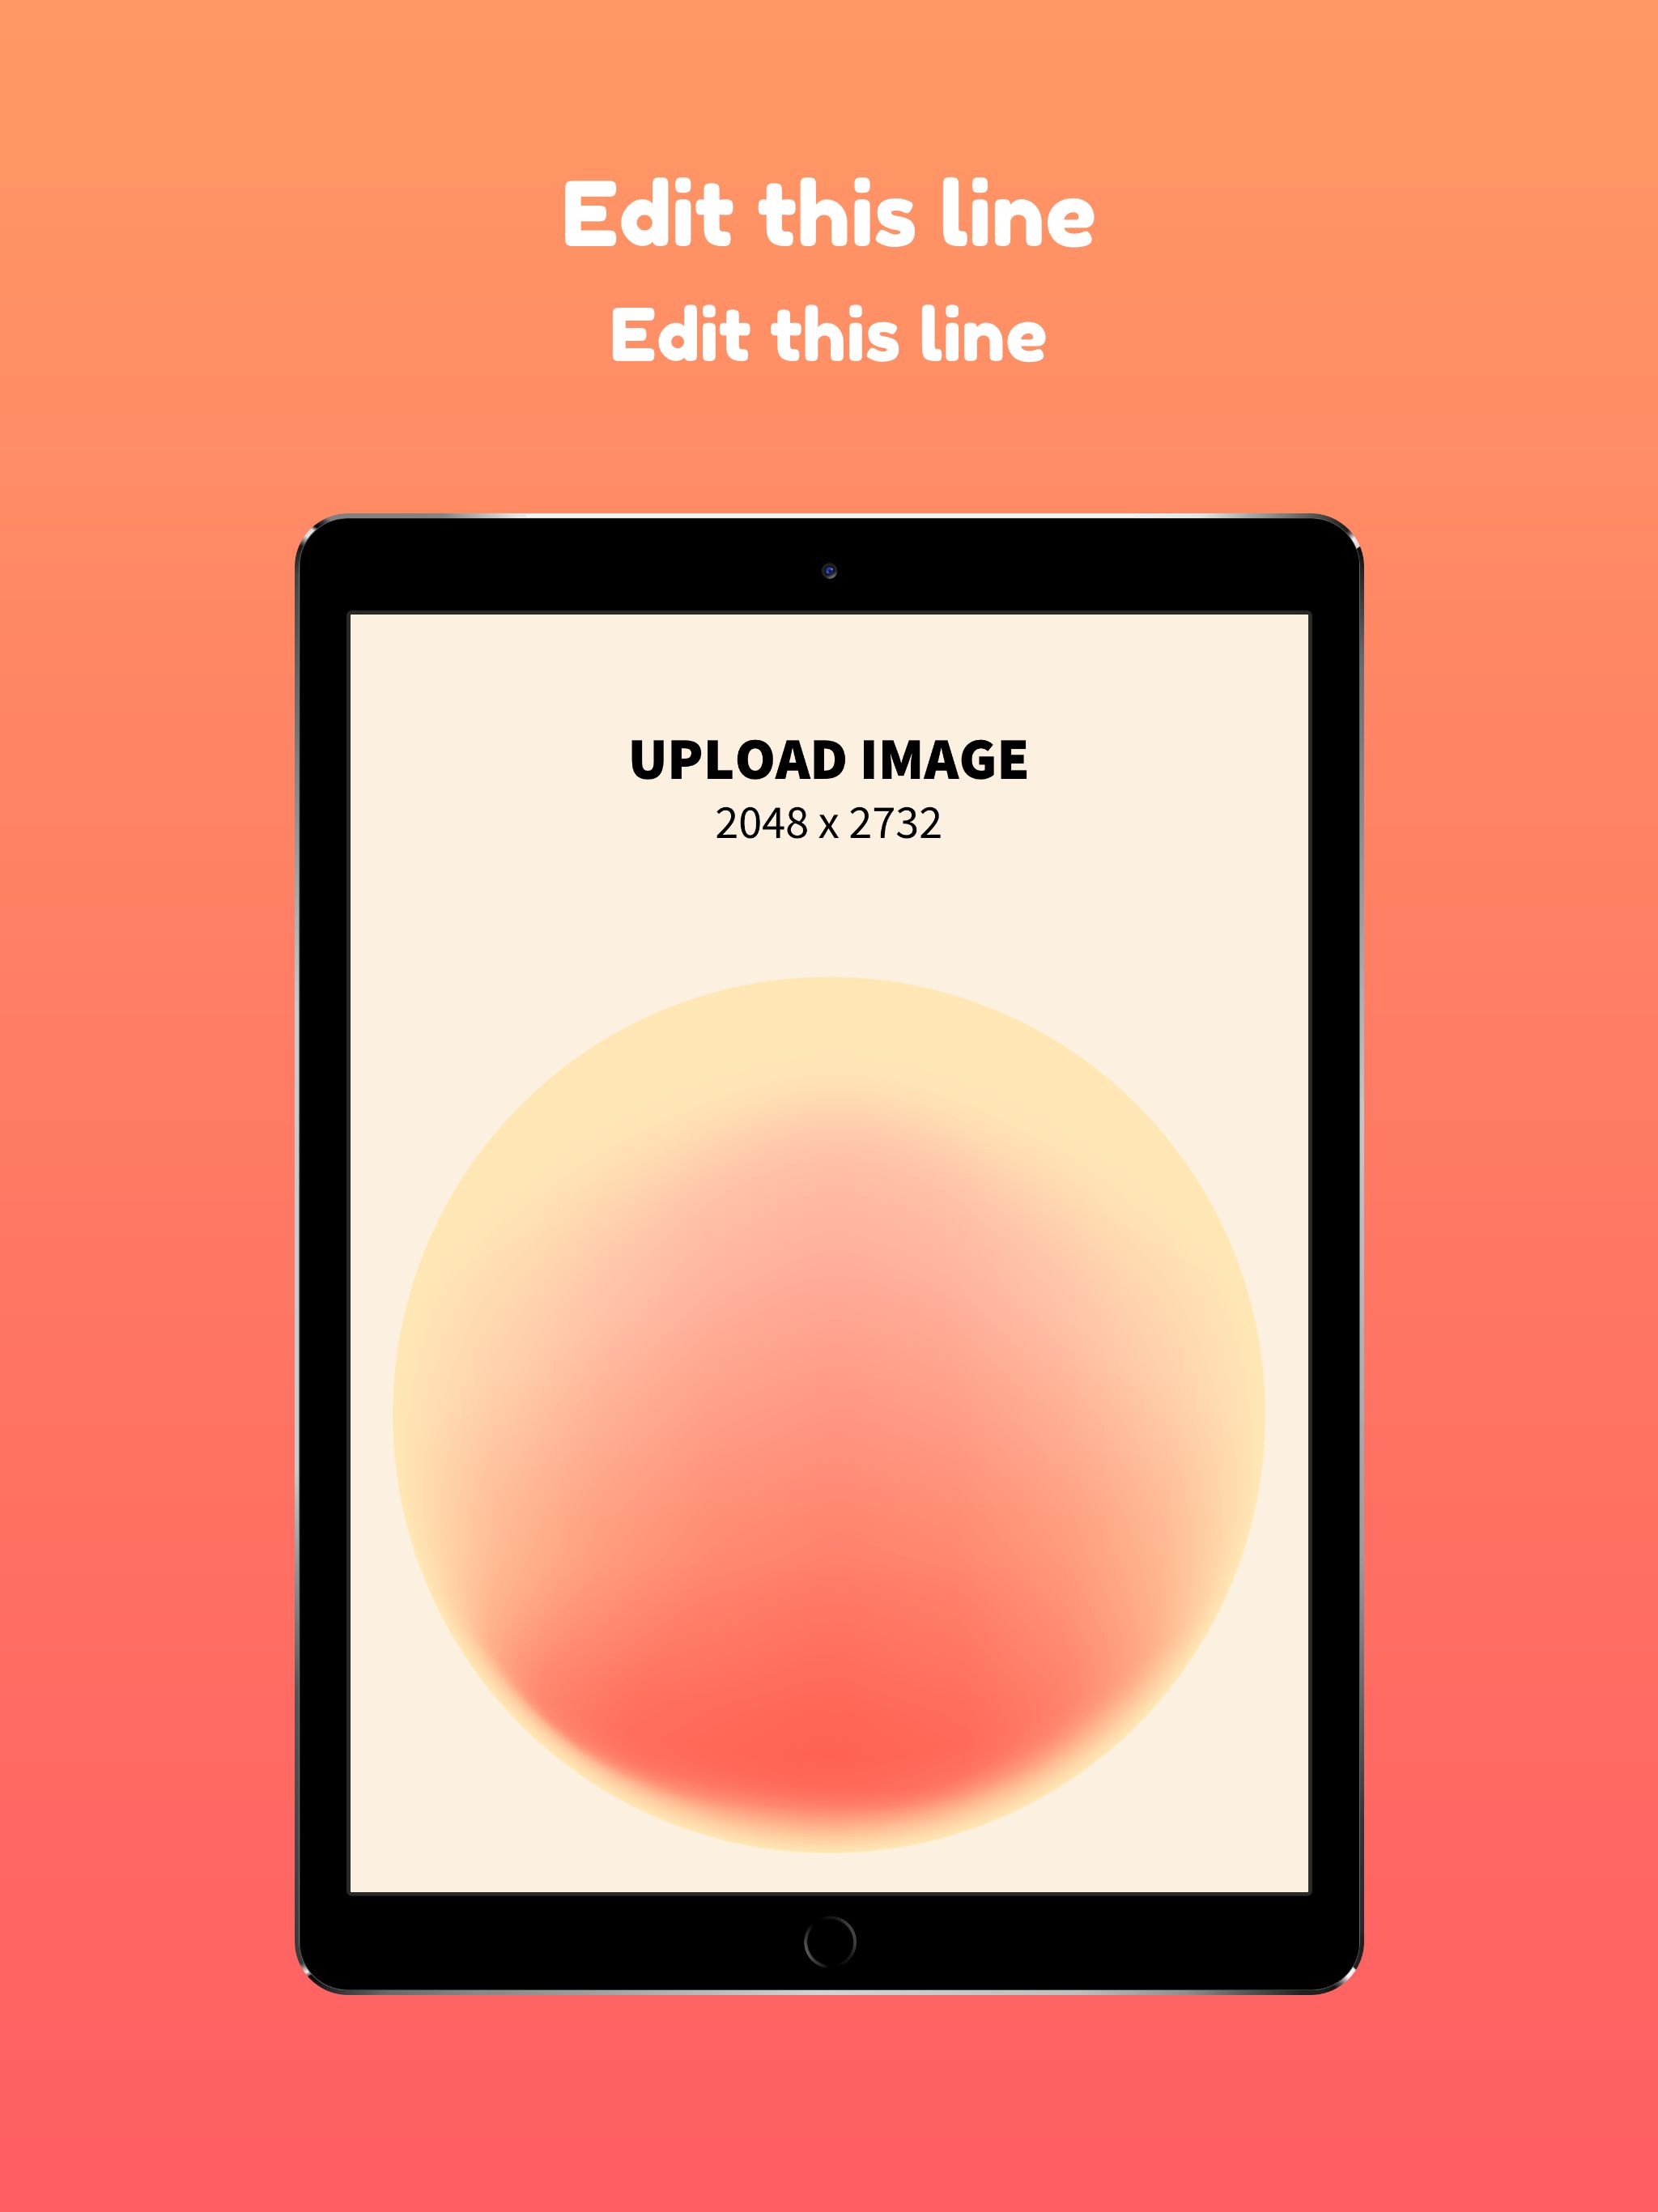 iPad Pro Screenshot 12 template. Quickly edit text, colors, images, and more for free.